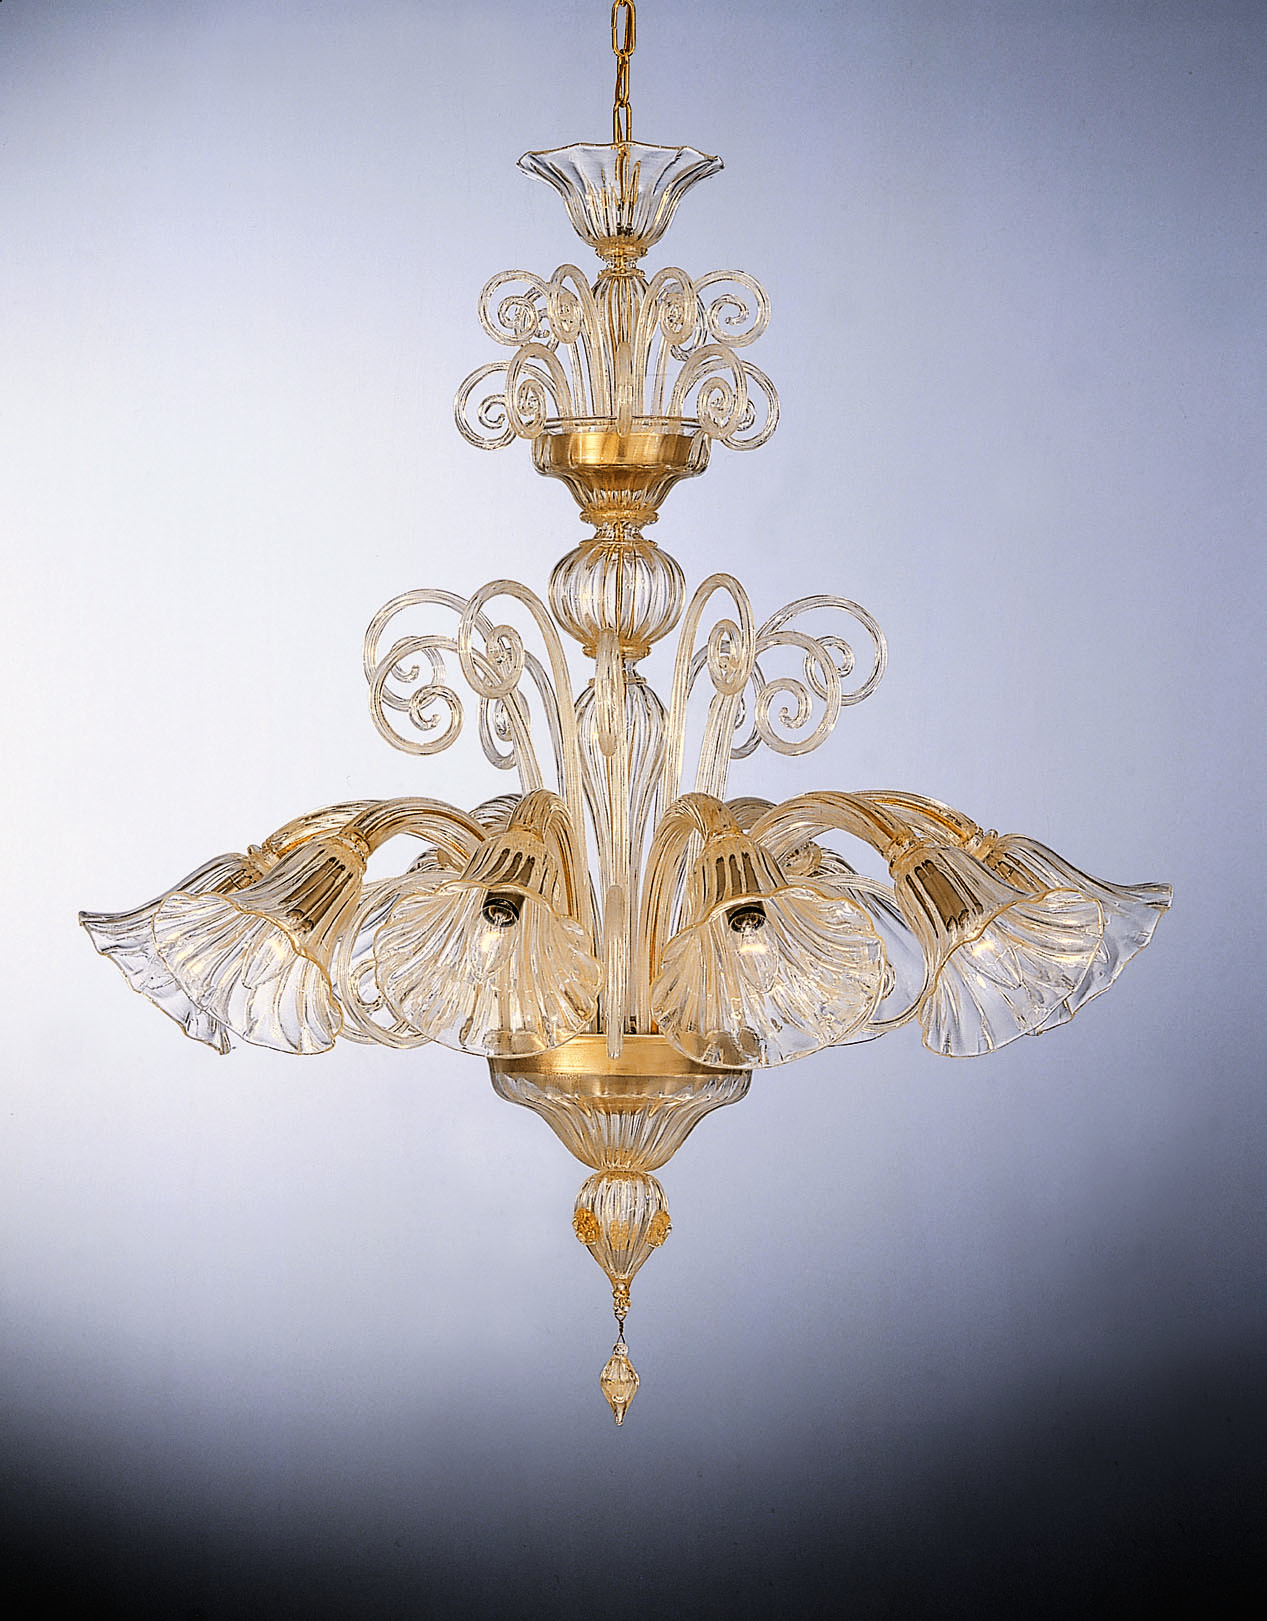 Crystal All Gold 24k Glass Chandelier “Hilton” With 8 Lights